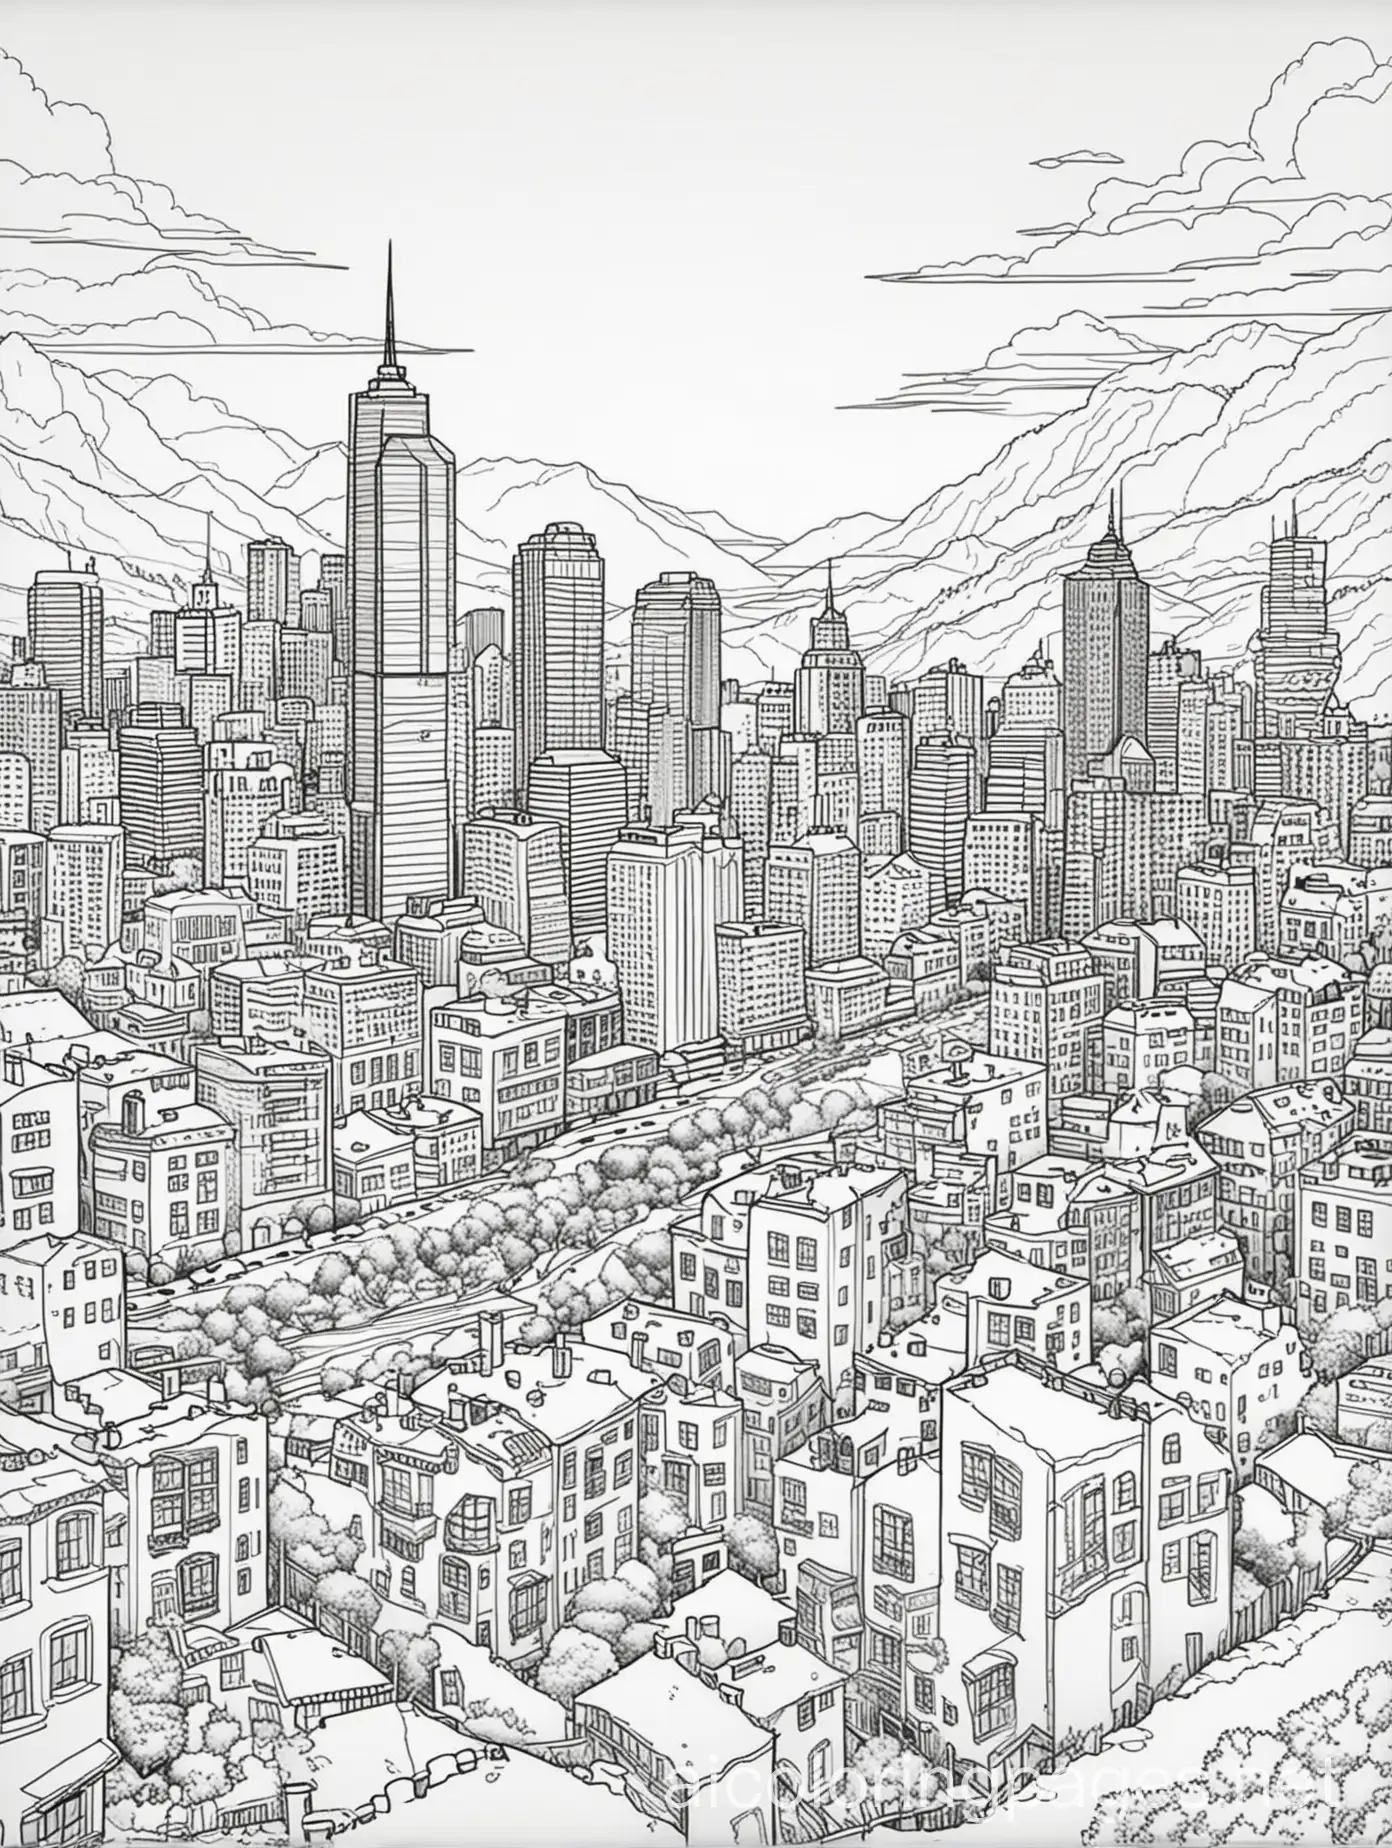 a black and white line drawing overlooking a large metropolitan city in a valley, coloring page, ample white space, bold lines easy for kids to color inside the lines, Coloring Page, black and white, line art, white background, Simplicity, Ample White Space. The background of the coloring page is plain white to make it easy for young children to color within the lines. The outlines of all the subjects are easy to distinguish, making it simple for kids to color without too much difficulty, Coloring Page, black and white, line art, white background, Simplicity, Ample White Space. The background of the coloring page is plain white to make it easy for young children to color within the lines. The outlines of all the subjects are easy to distinguish, making it simple for kids to color without too much difficulty